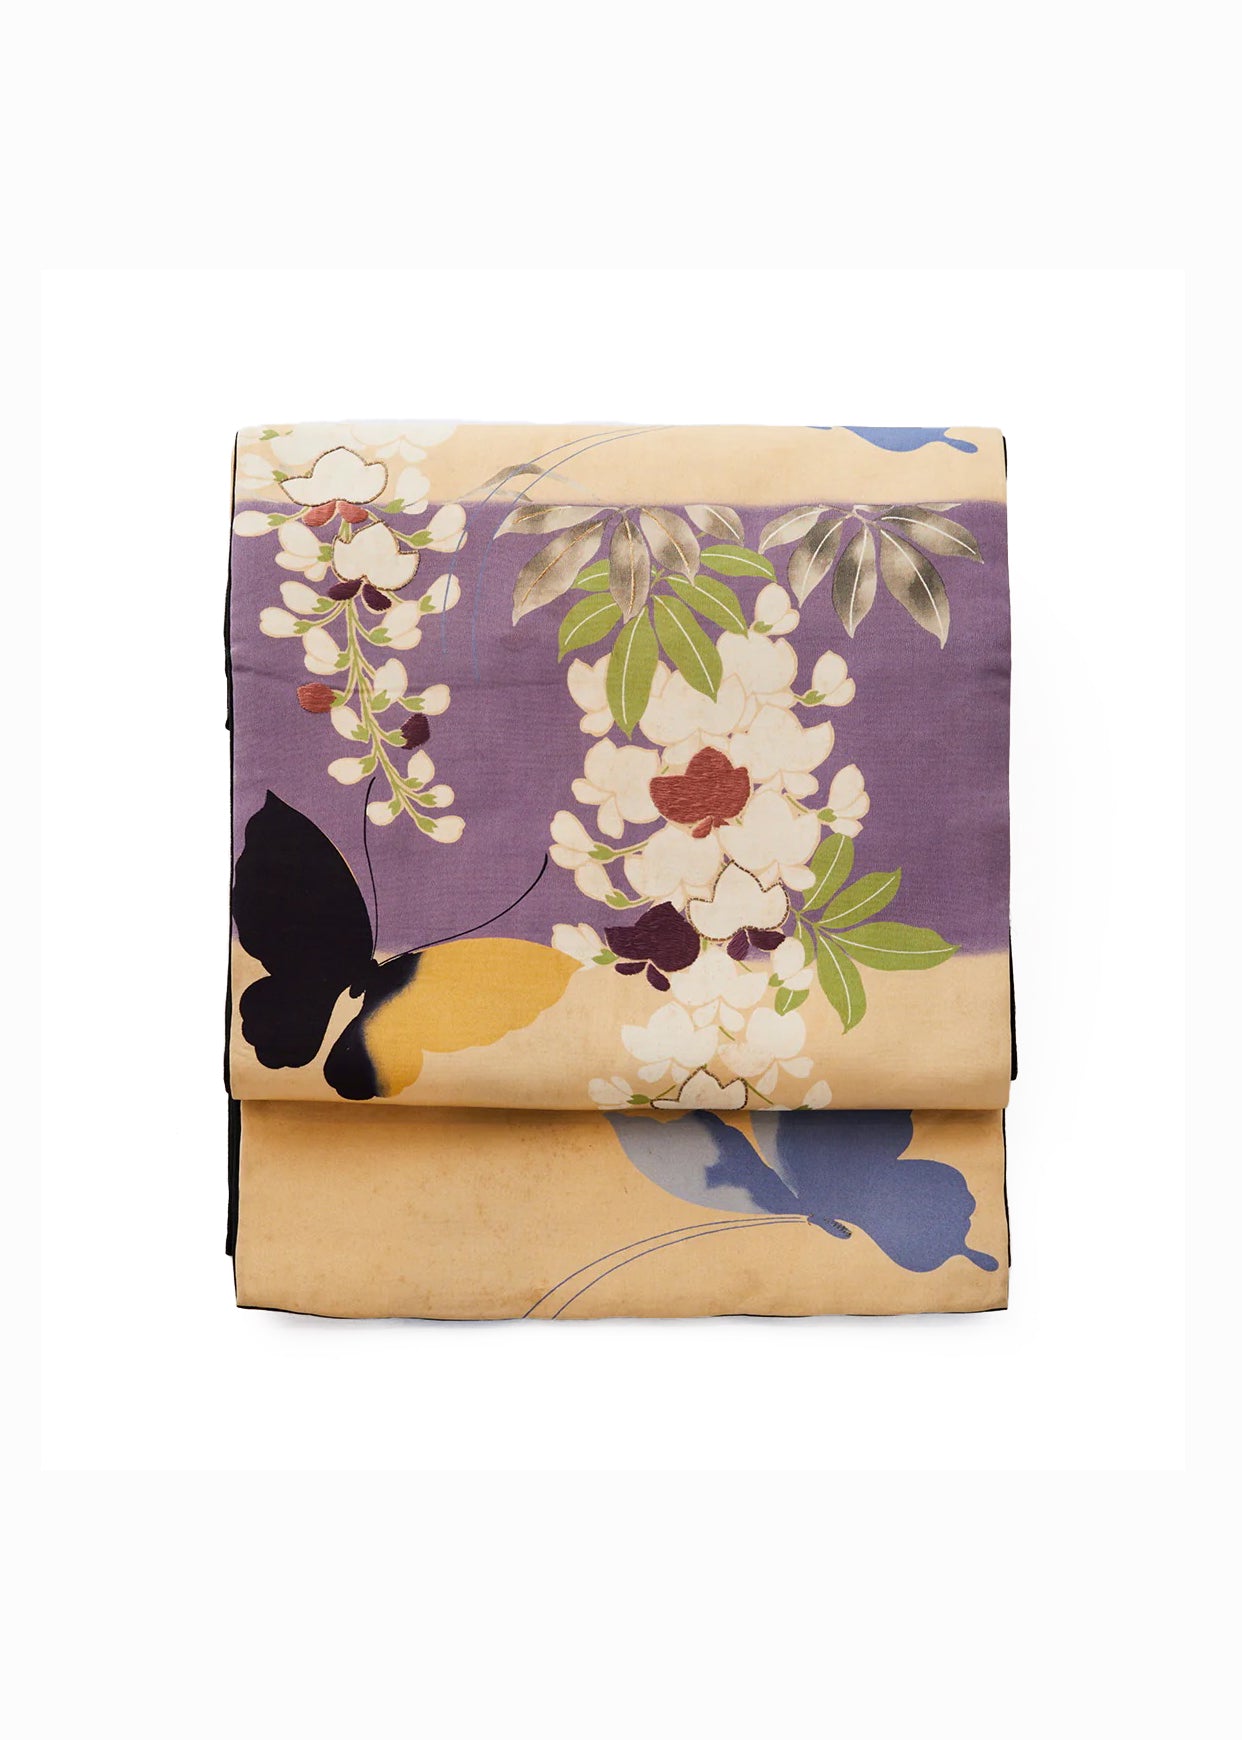 Day and Night Zone Antique "Wisteria and Butterfly" Silk